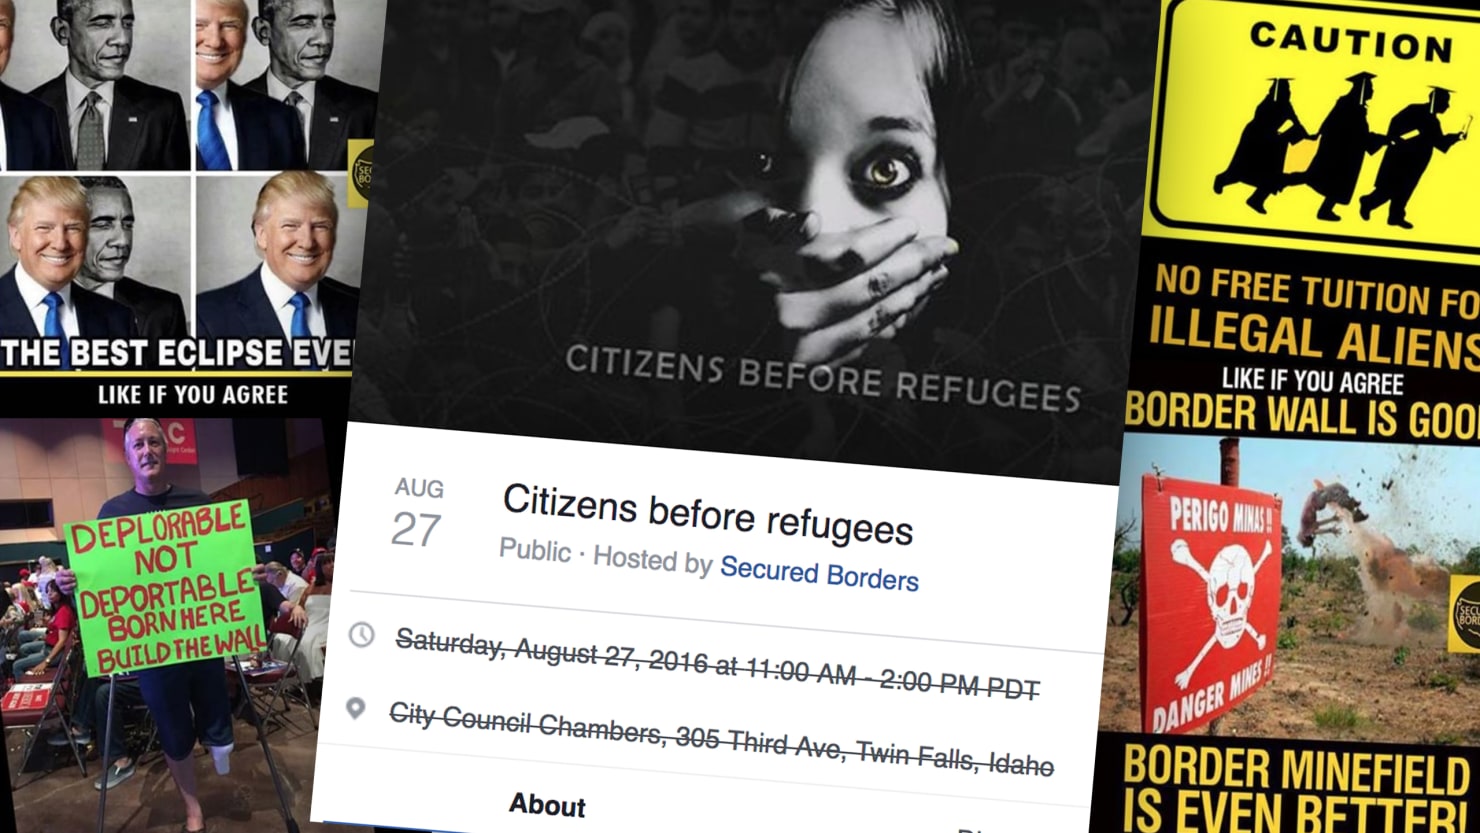 Russia Used Facebook Events to Organize Anti-Immigrant Rallies on U.S. Soil